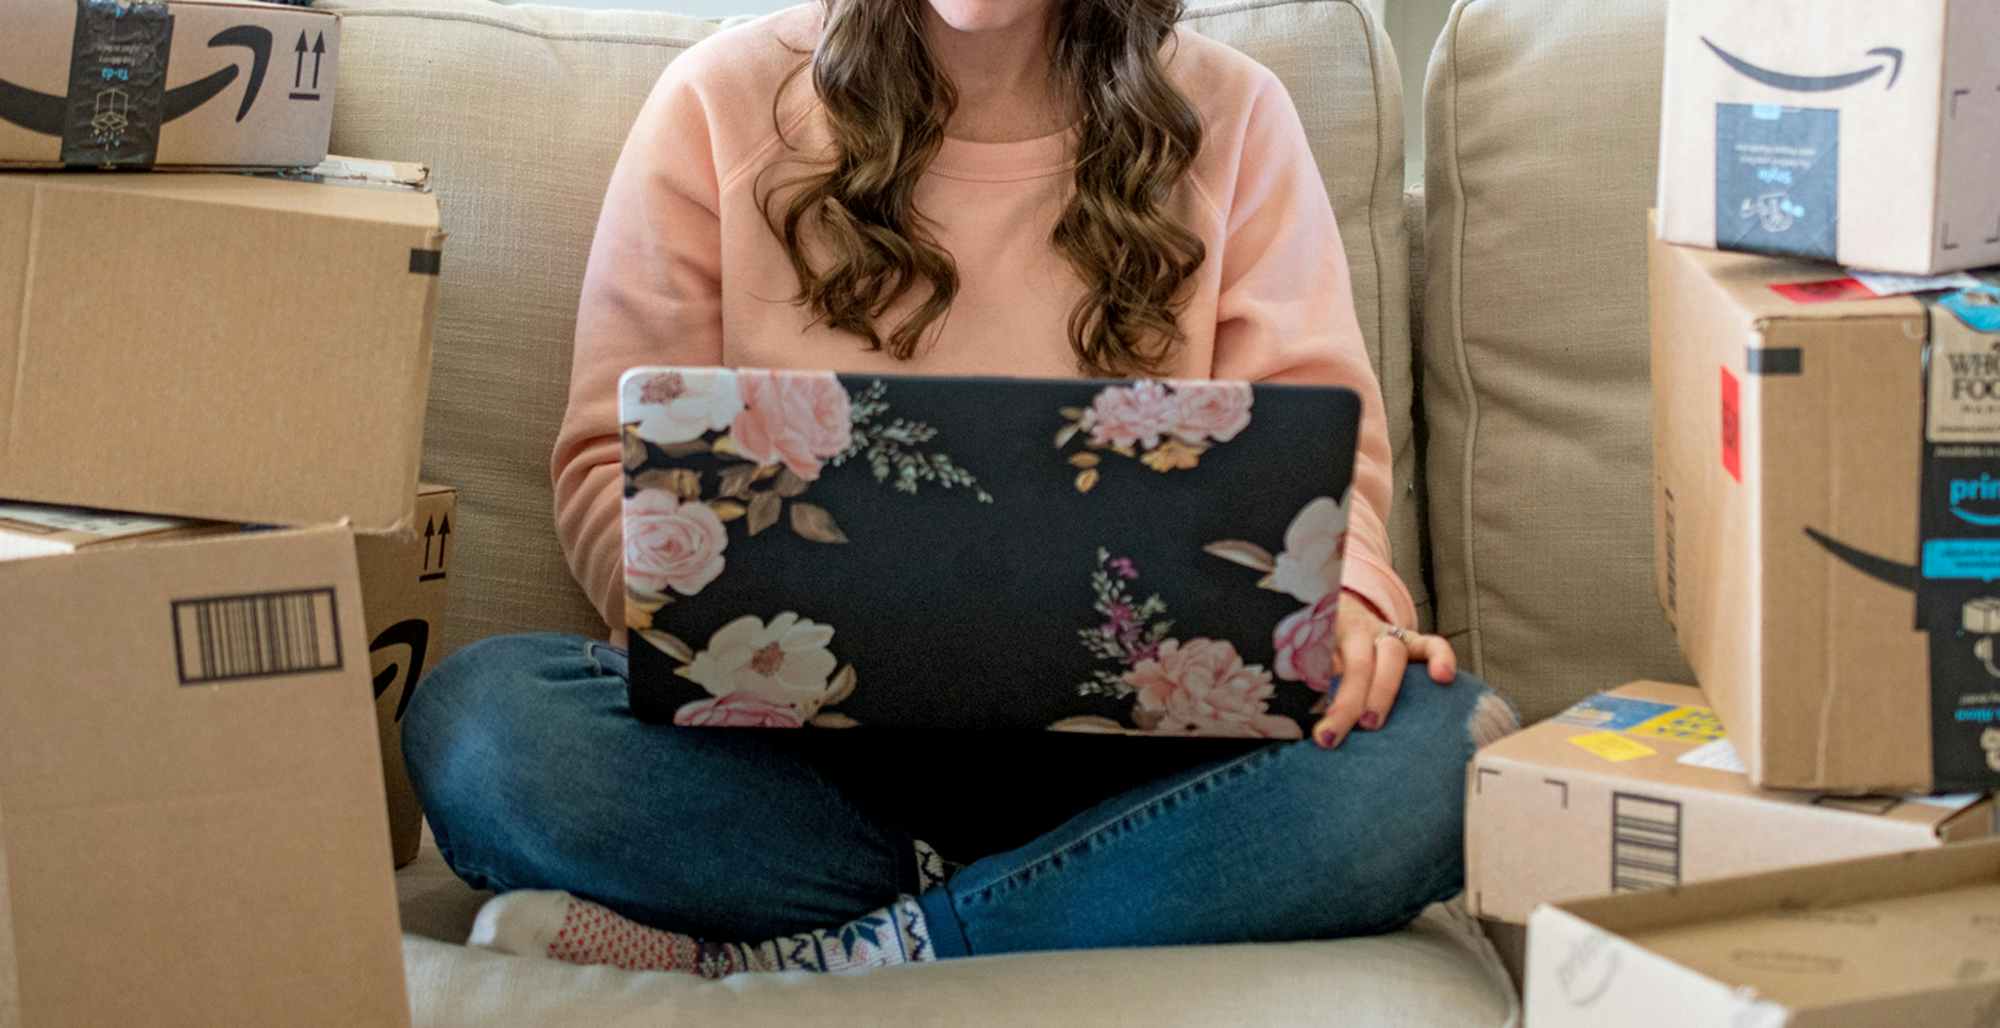 person with laptop on couch surrounded by amazon boxes